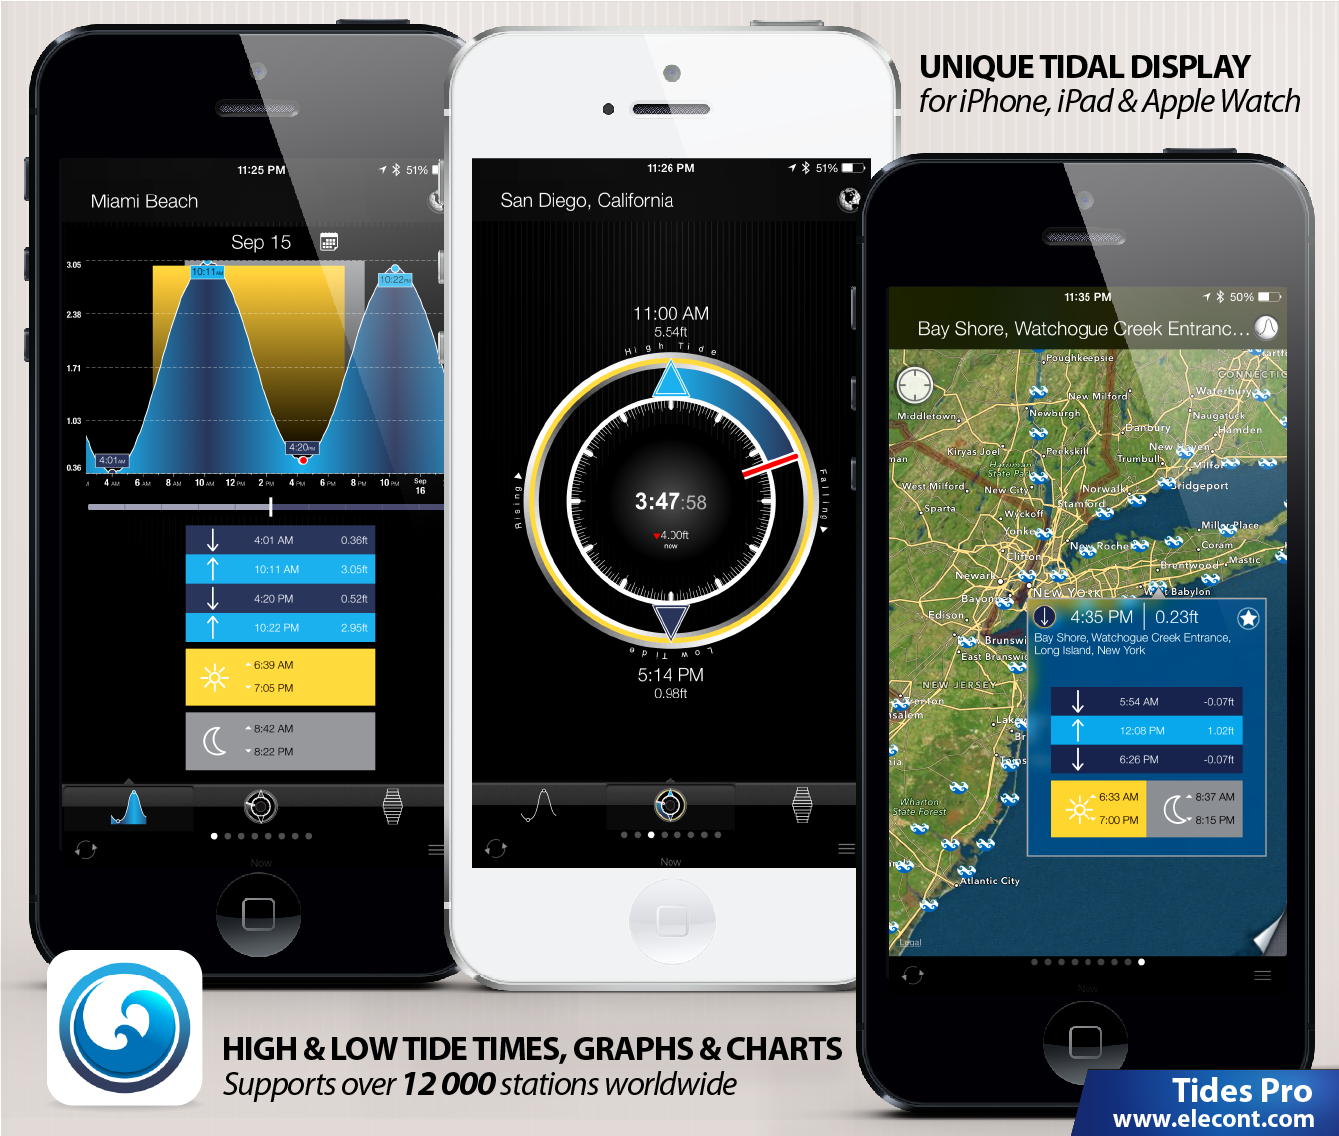 Tides PRO for iPhone, iPad and Apple Watch- Get high and low tide times, tide charts, tide tables for  over 12000 of ports, harbors and coastal locations around the World . The app reports high and Low tide times, tide predictions with up to the minute accuracy , Sunrise, Sunset, Moonrise, Moonset times, Solunar charts, Current water level and unique 'Tide watch' interface for Apple Watch.